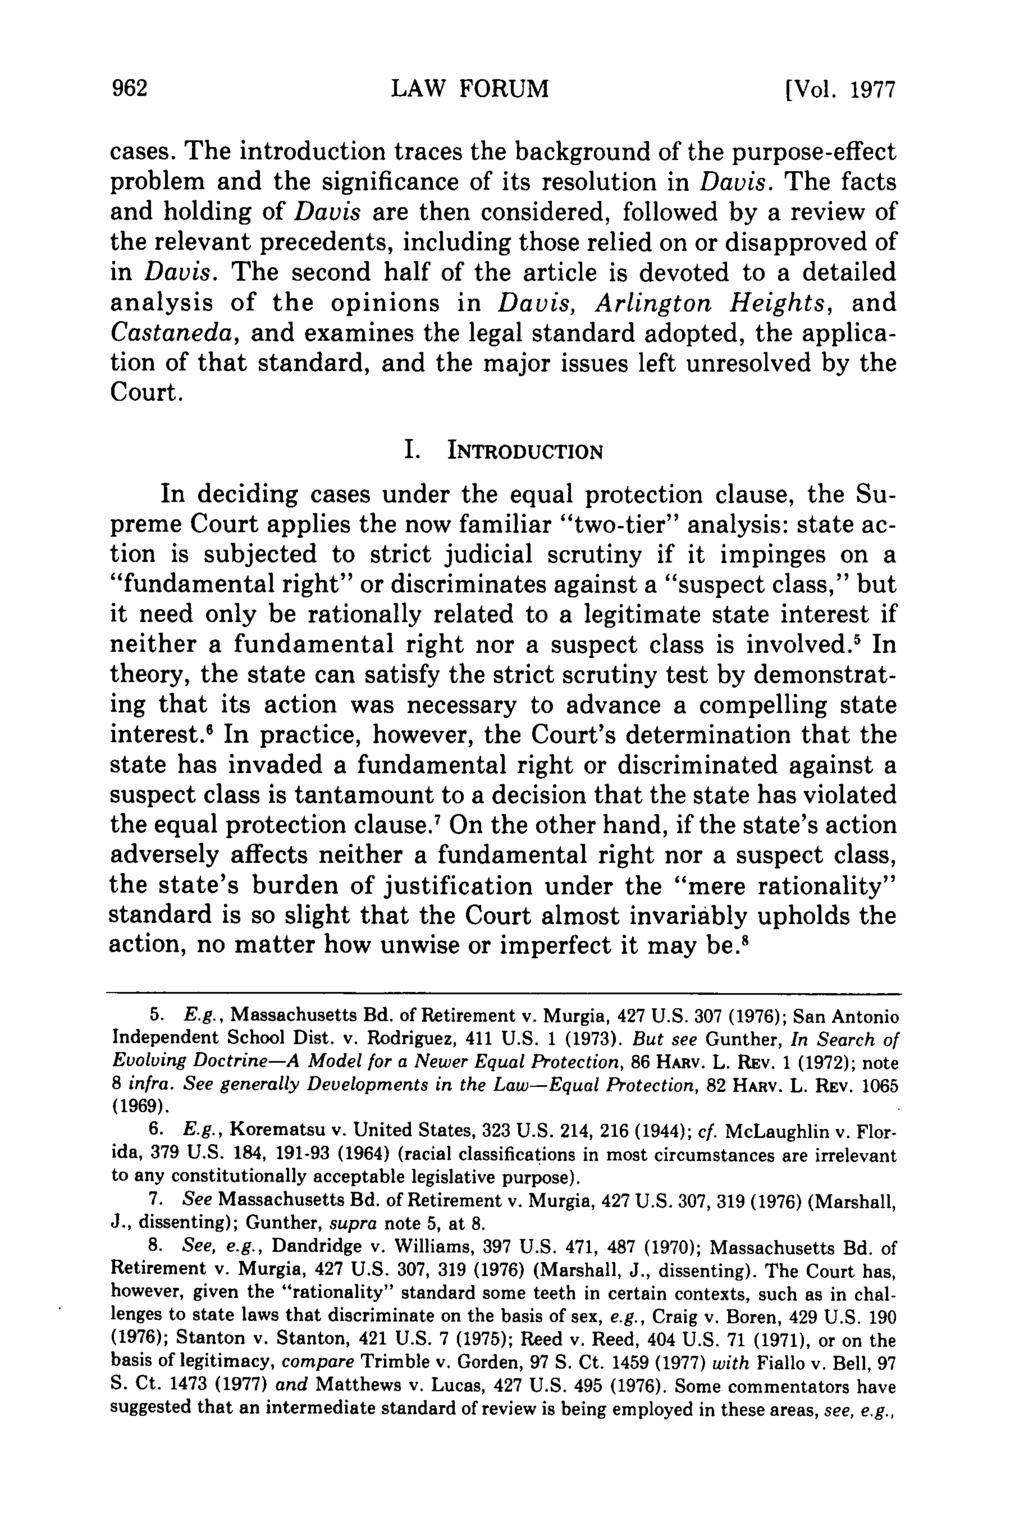 LAW FORUM [Vol. 1977 cases. The introduction traces the background of the purpose-effect problem and the significance of its resolution in Davis.